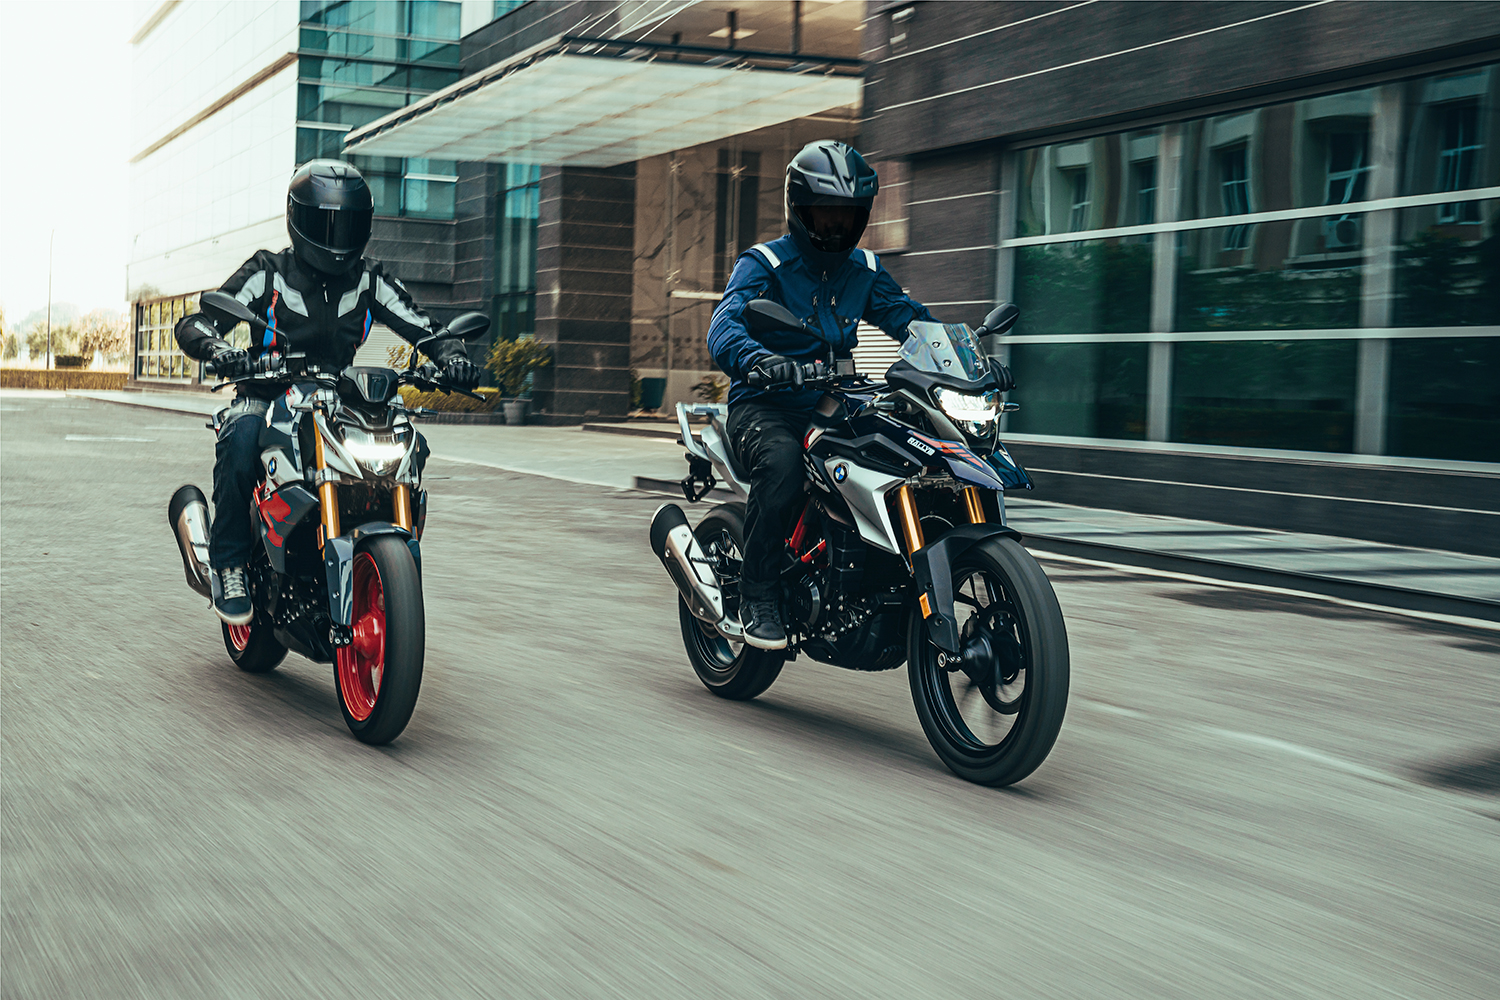 2020 BMW G 310 R and BMW G 310 GS launched